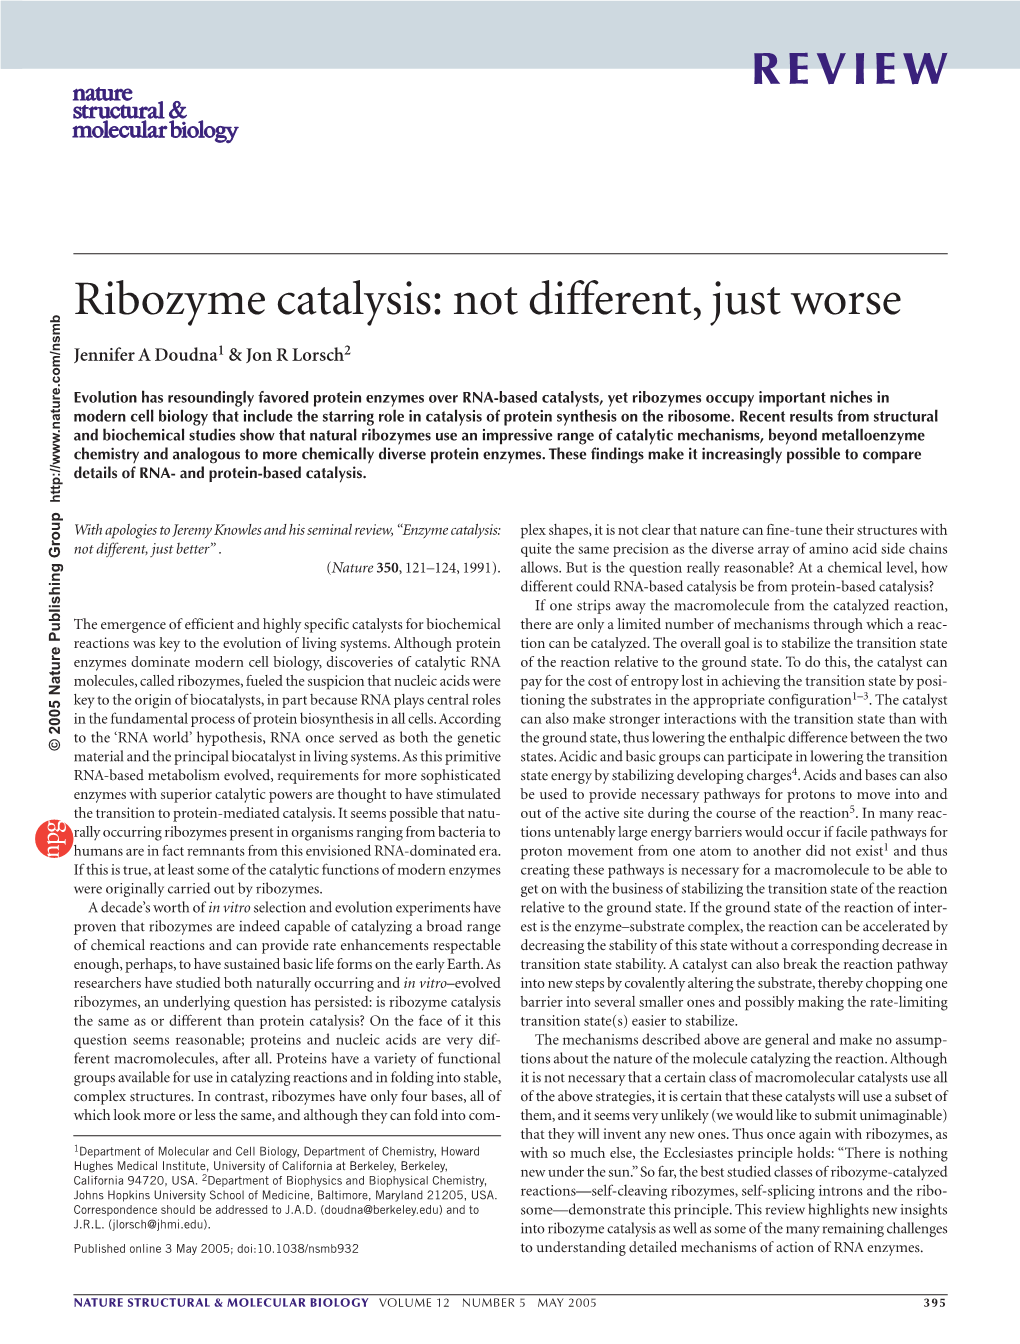 Ribozyme Catalysis: Not Different, Just Worse